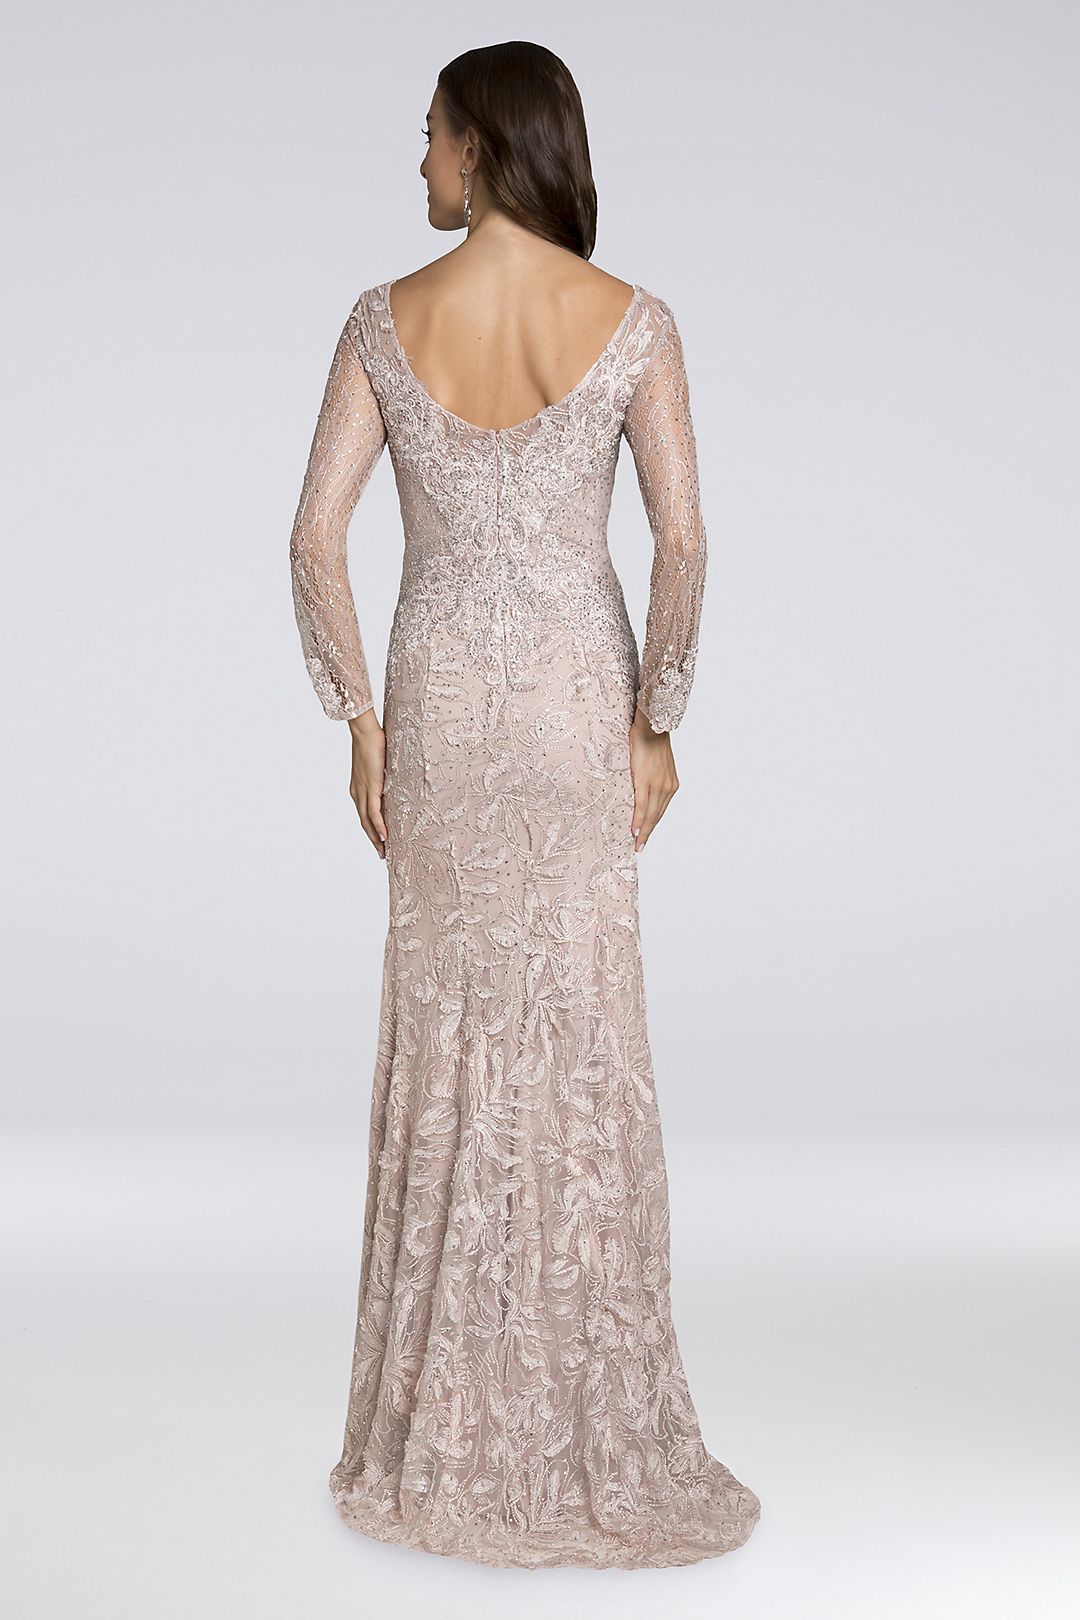 Lara Beth Lace Long-Sleeve Gown Image 2